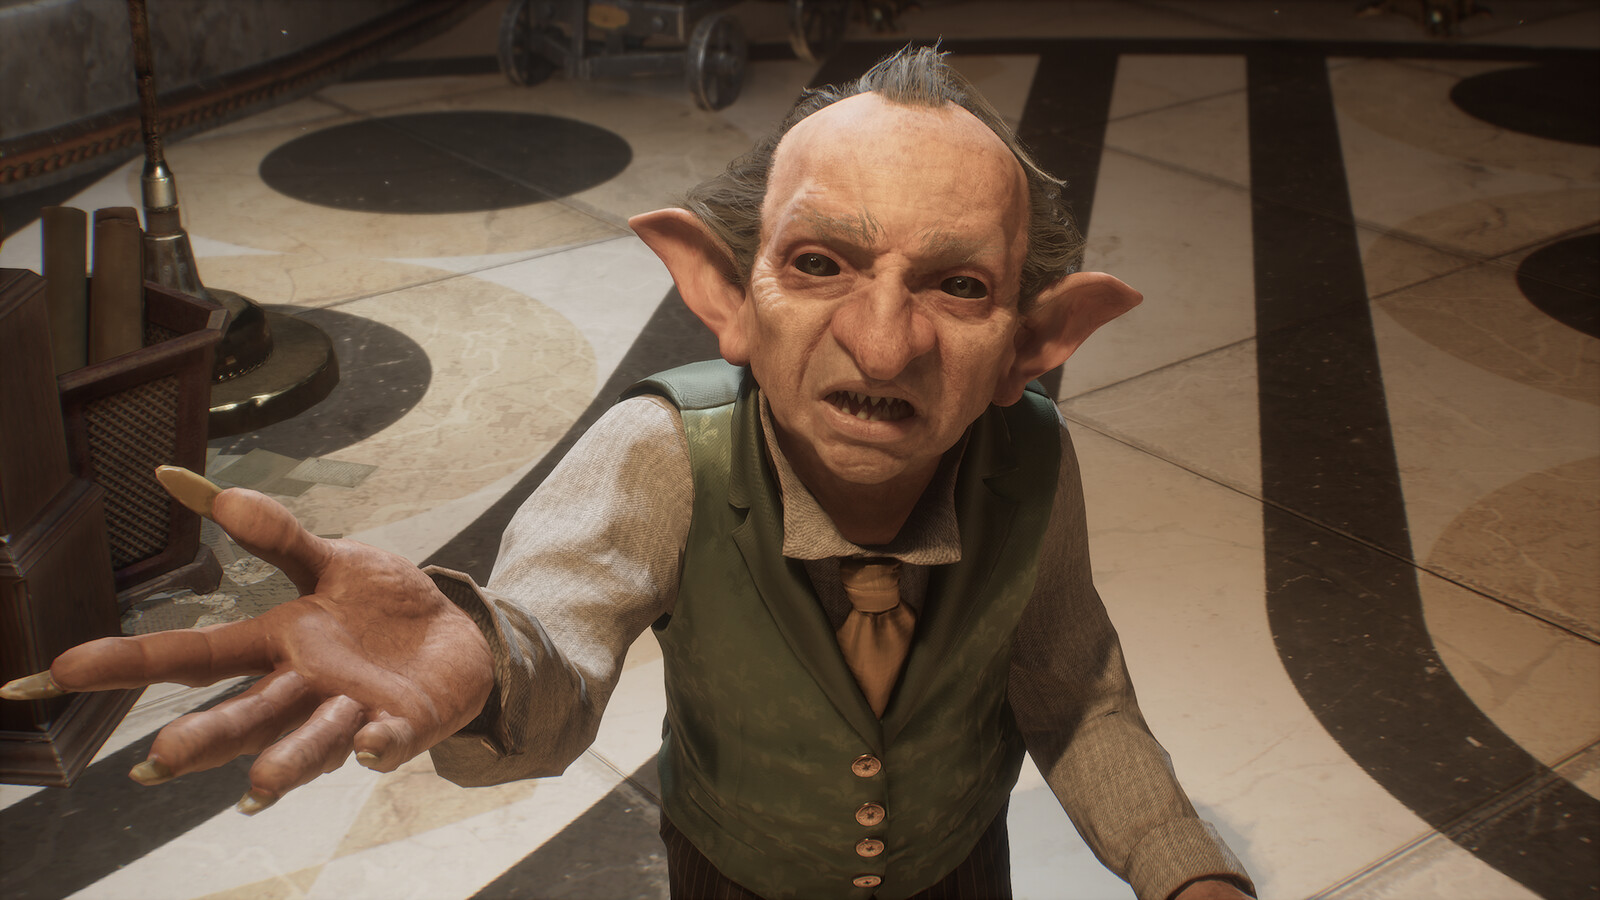 The art director, Jeff Bunker, felt like it was difficult to connect with just a black eye. So I added a very subtle grey/ blue/ green iris to the goblin's eyes to stay away from the warm red eyes of Ranrok and the bad guys. 